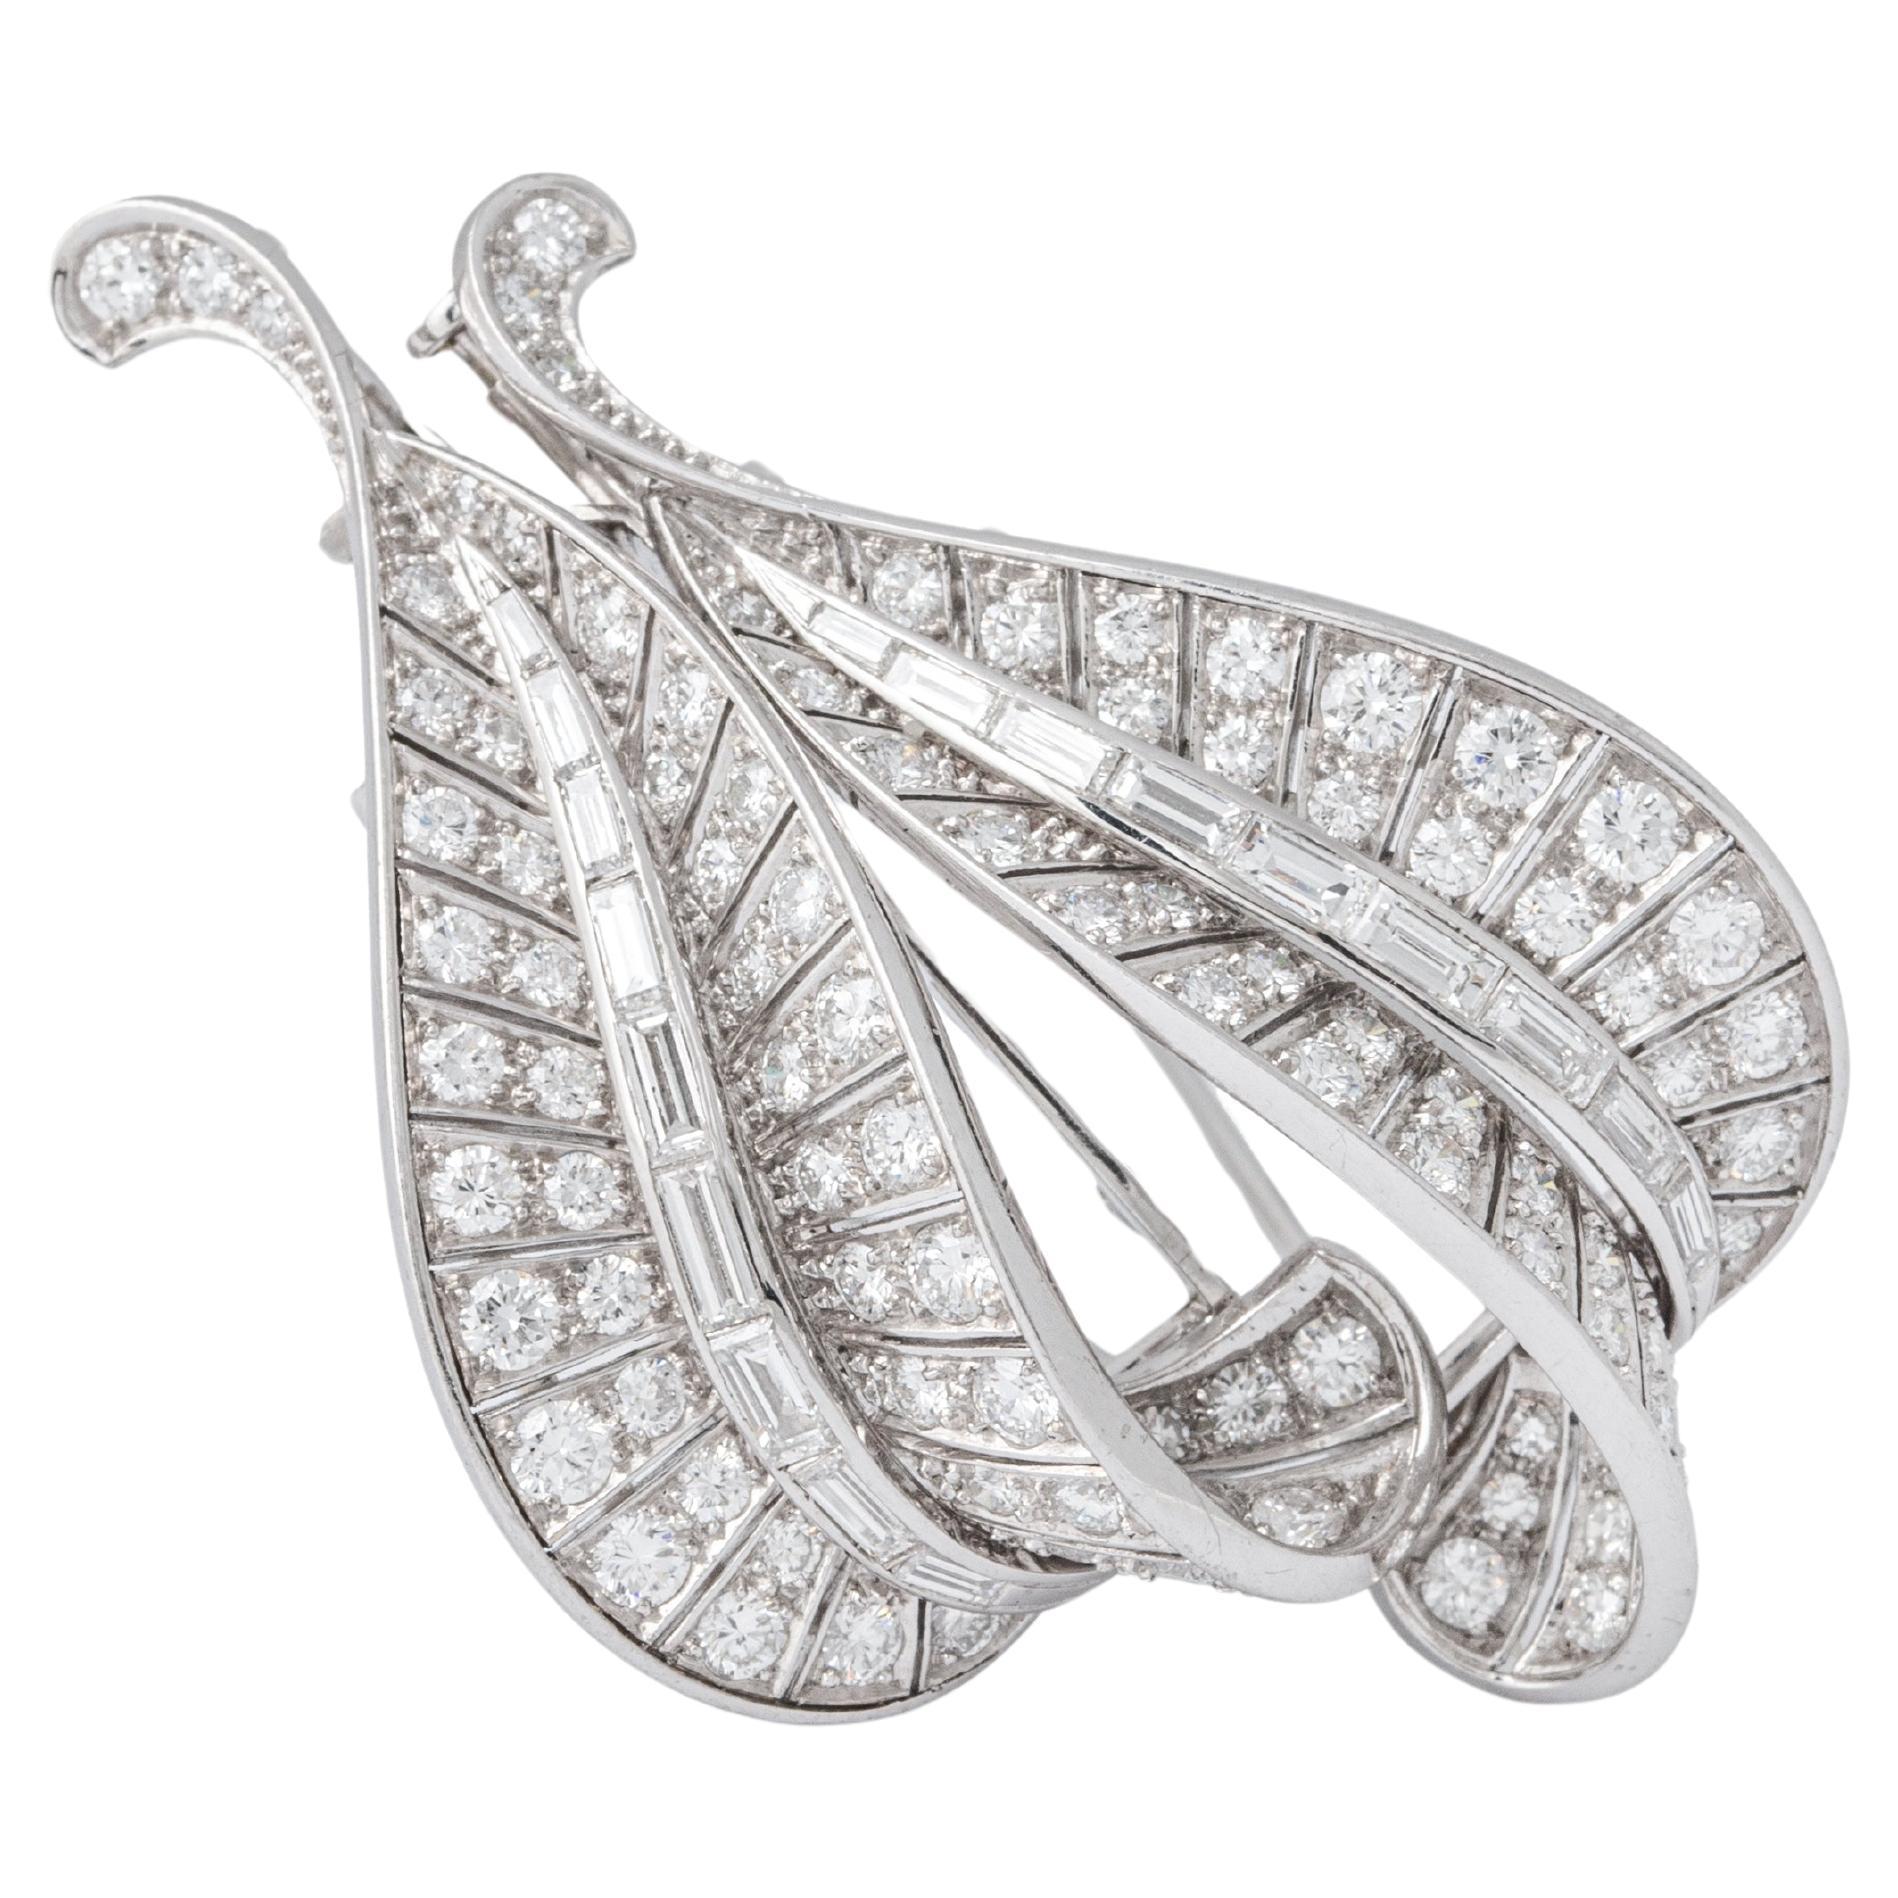 Diamond Platinum and white gold 18K Double Clip Brooch.
Total diamond weight: approximately 4.20 carats.
Circa 1940.

Total length: 5.50 centimeters.
Width: 0.50 centimeters up to 3.30 centimeters

Total weight: 21.82 grams.